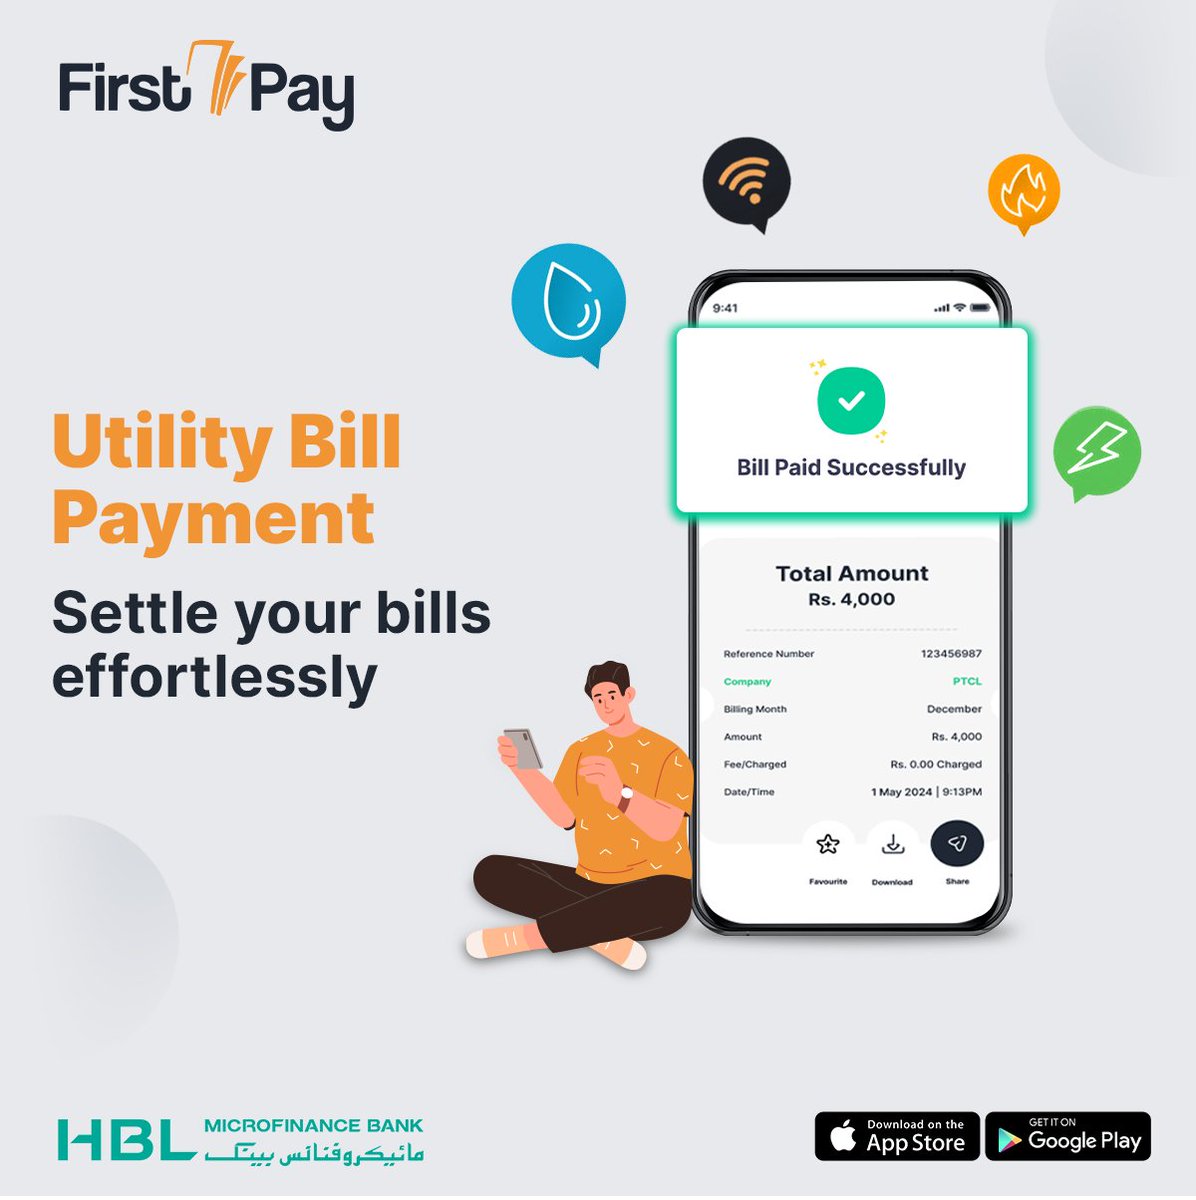 Say goodbye to bill payment hassles!
With FirstPay, paying utility bills is hassle-free. Say goodbye to long queues and late payments!

Download FirstPay App Now:
onelink.to/hblmfbfp

#FirstPay #BillPayment #FirstPayMobileWallet